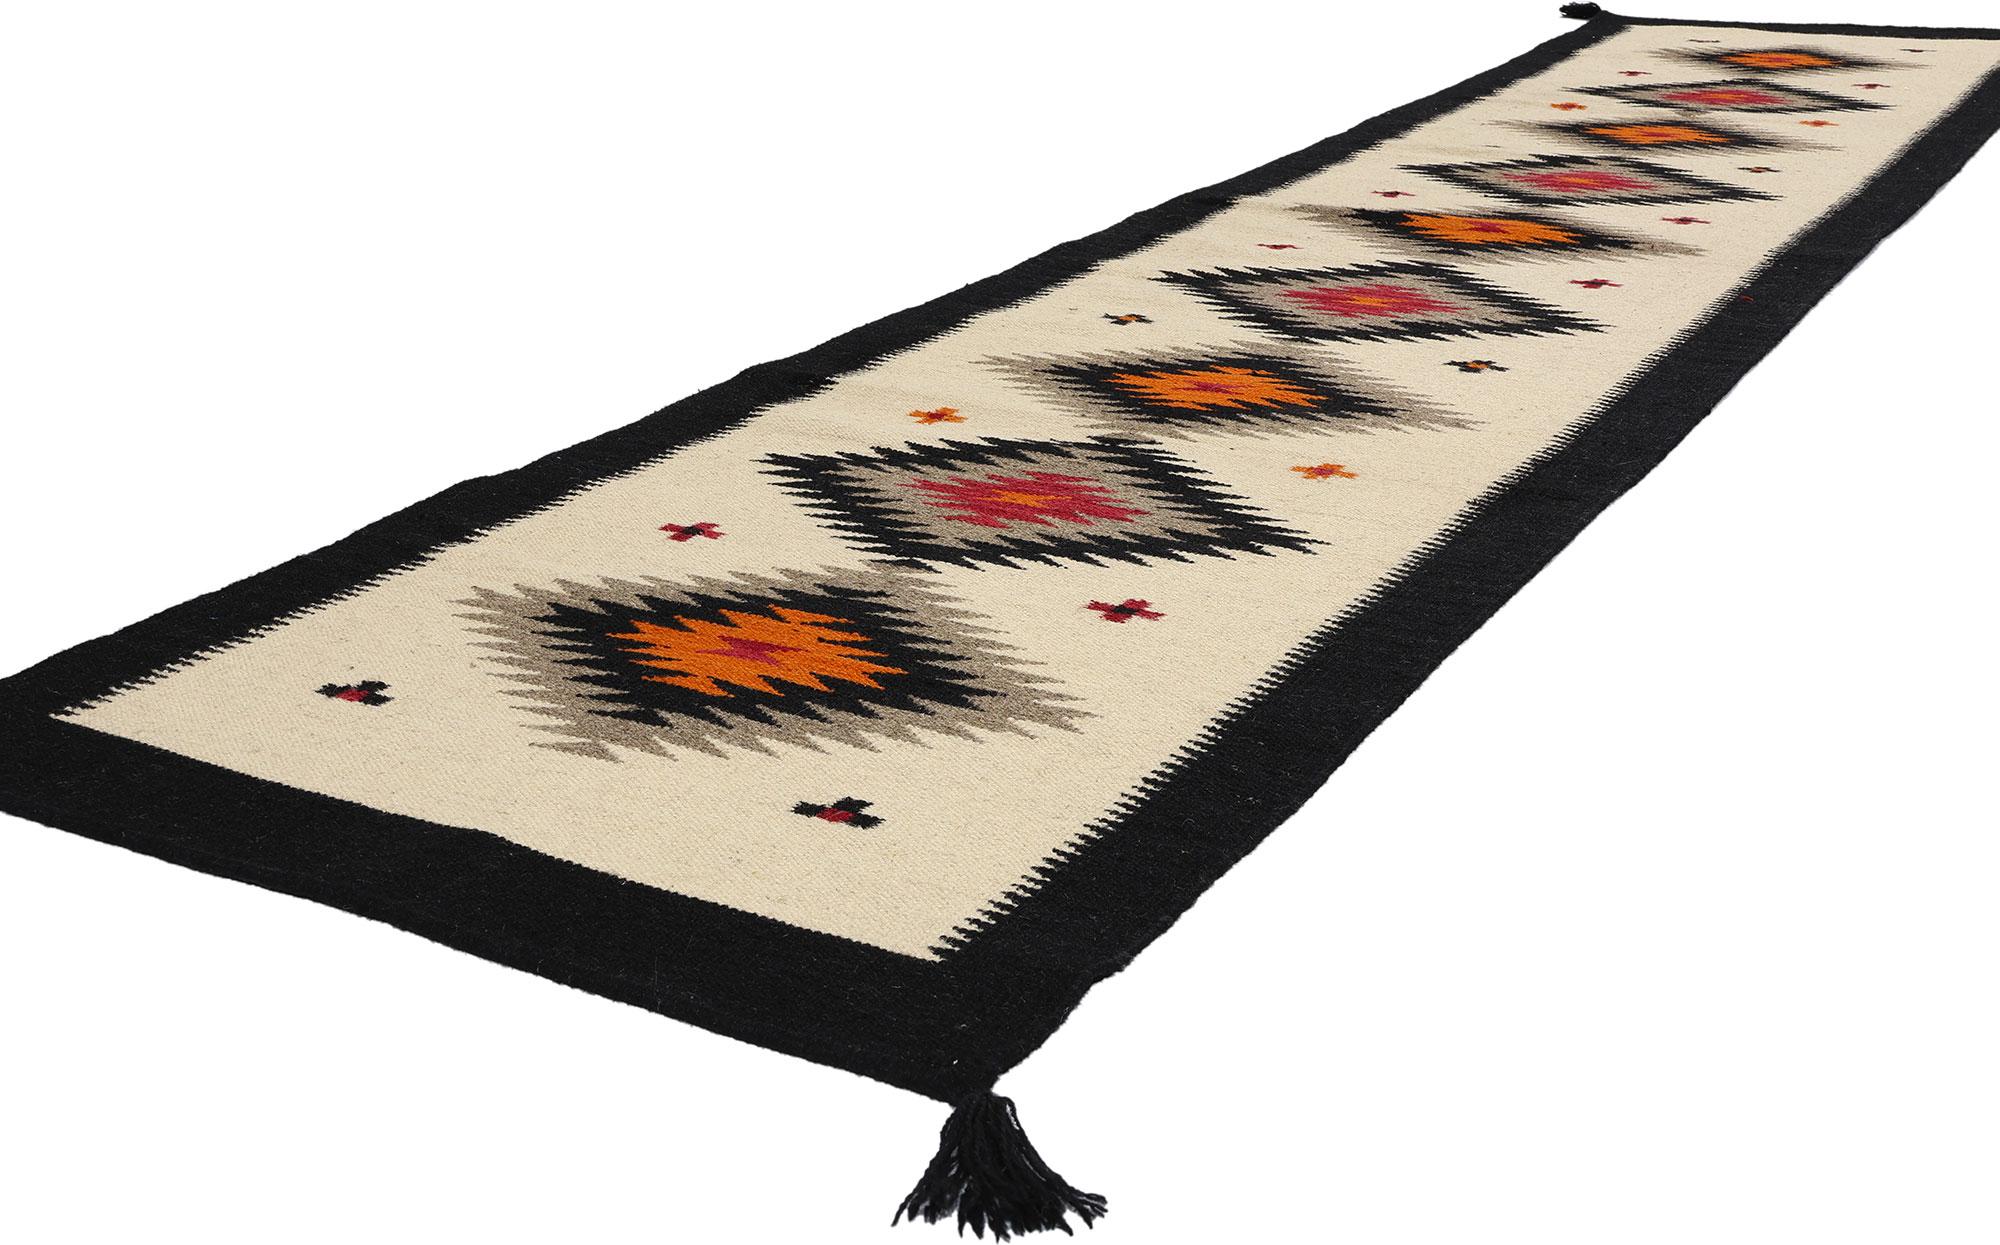 81049 Southwest Modern Ganado Navajo-Style Rug Runner, 02'07 x 12'01. Transform your living space with the captivating allure of Southwest Modern aesthetics embodied in this meticulously handwoven wool Ganado Navajo-style rug runner. A testament to